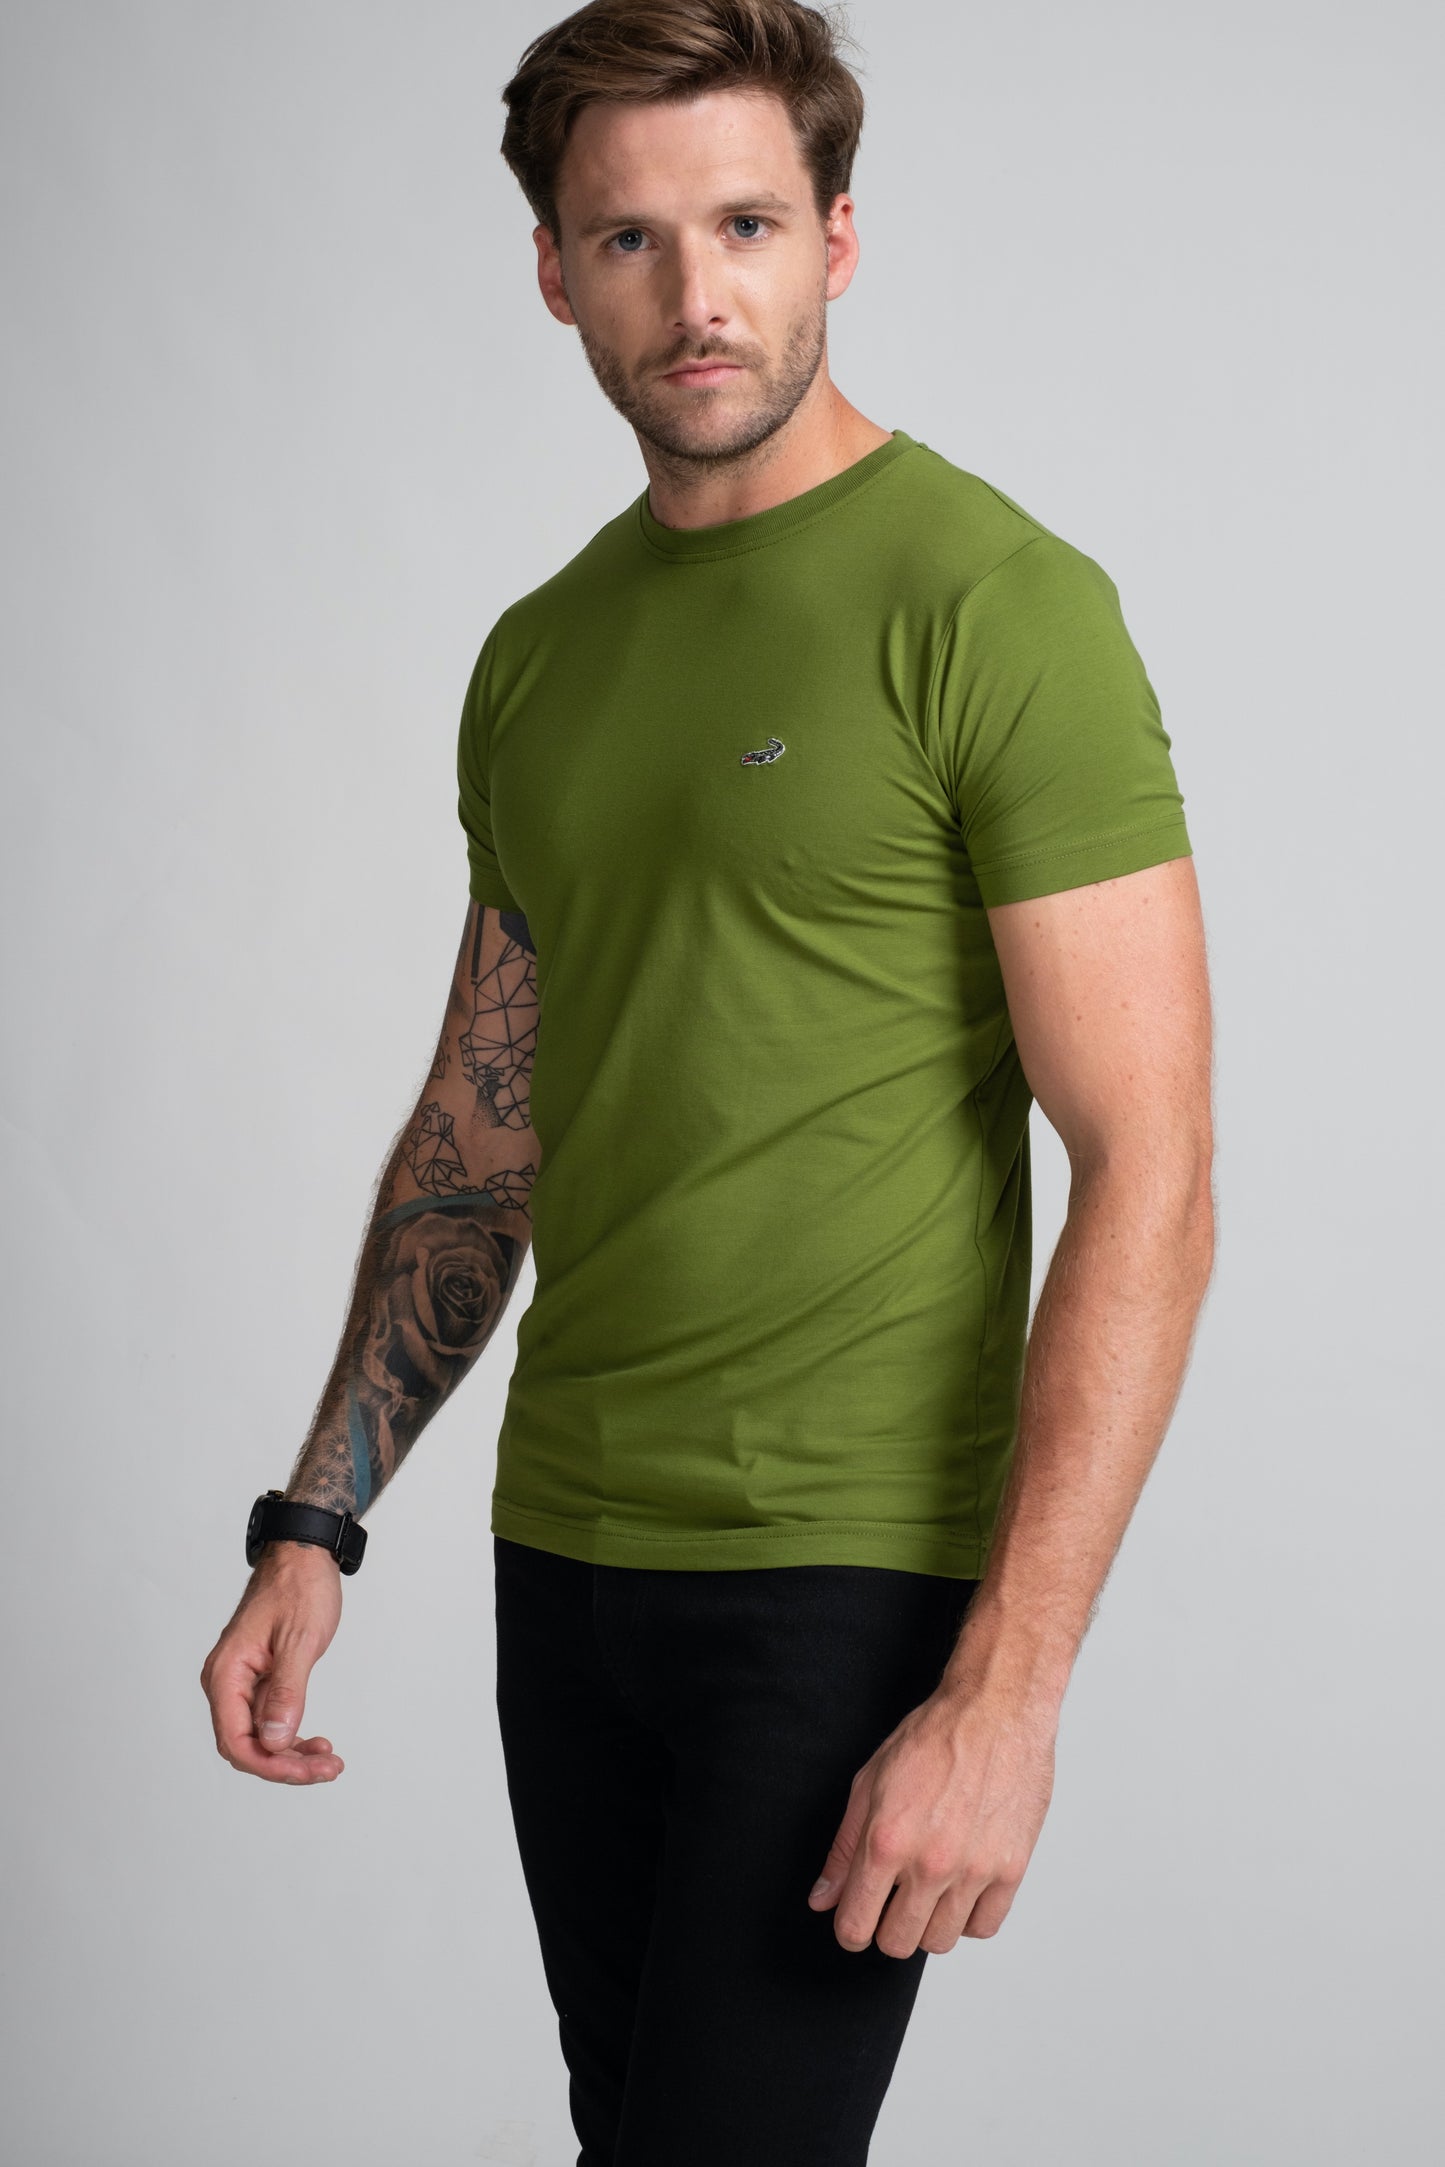 Action Fit Short sleeves-CasualCrew Neck - Grass Hopper